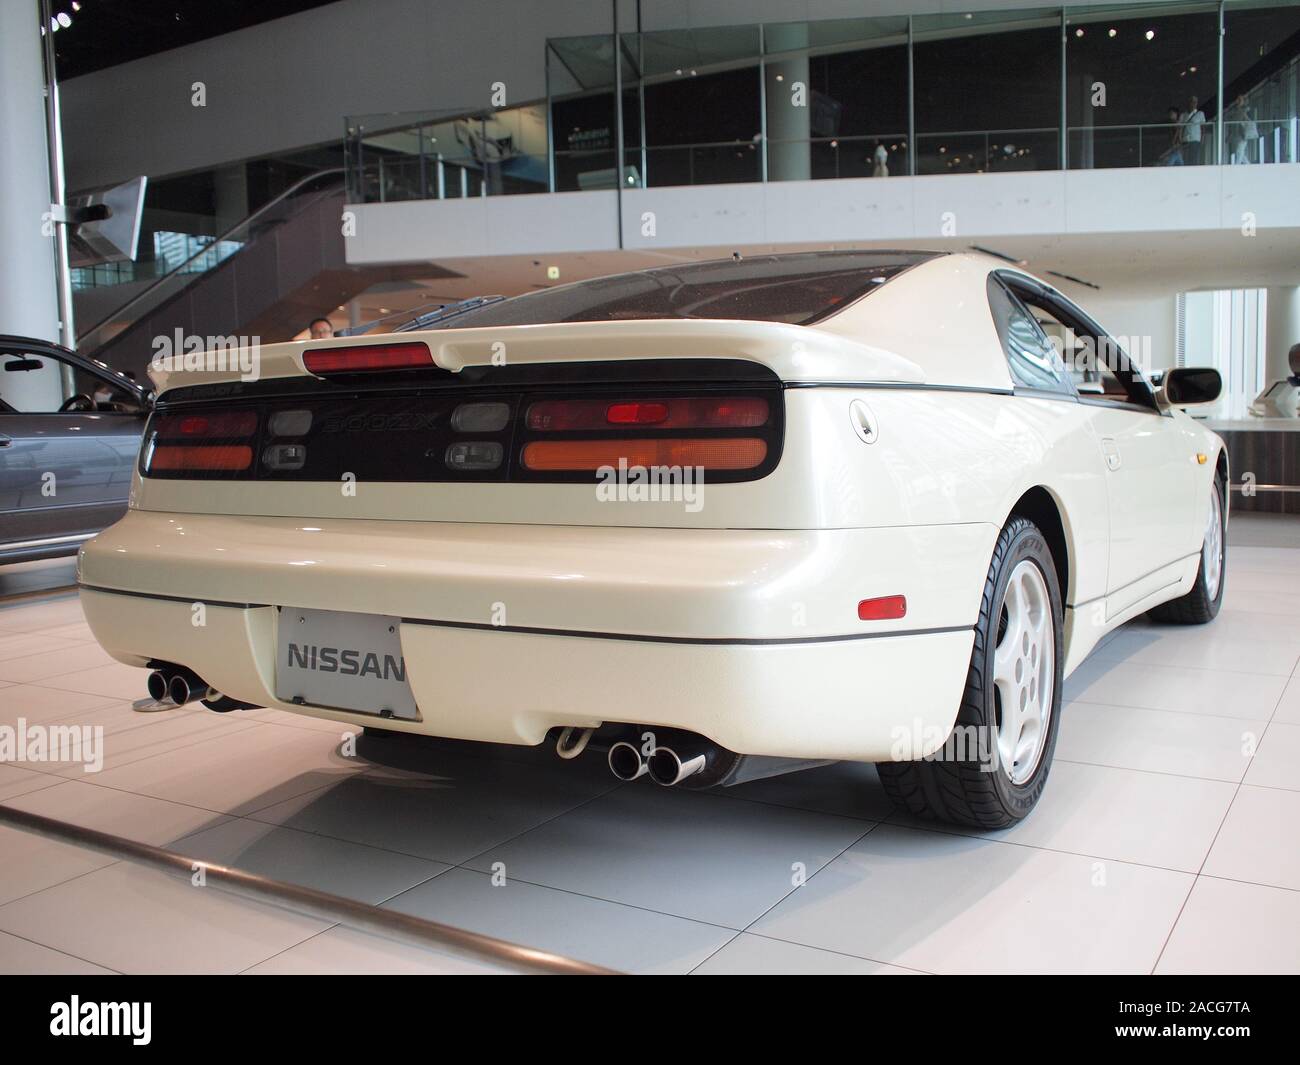 1989 Nissan Fairlady Z 2by2 300ZX Twin-Turbo at the NIssan Global Headquarters Gallery. Stock Photo